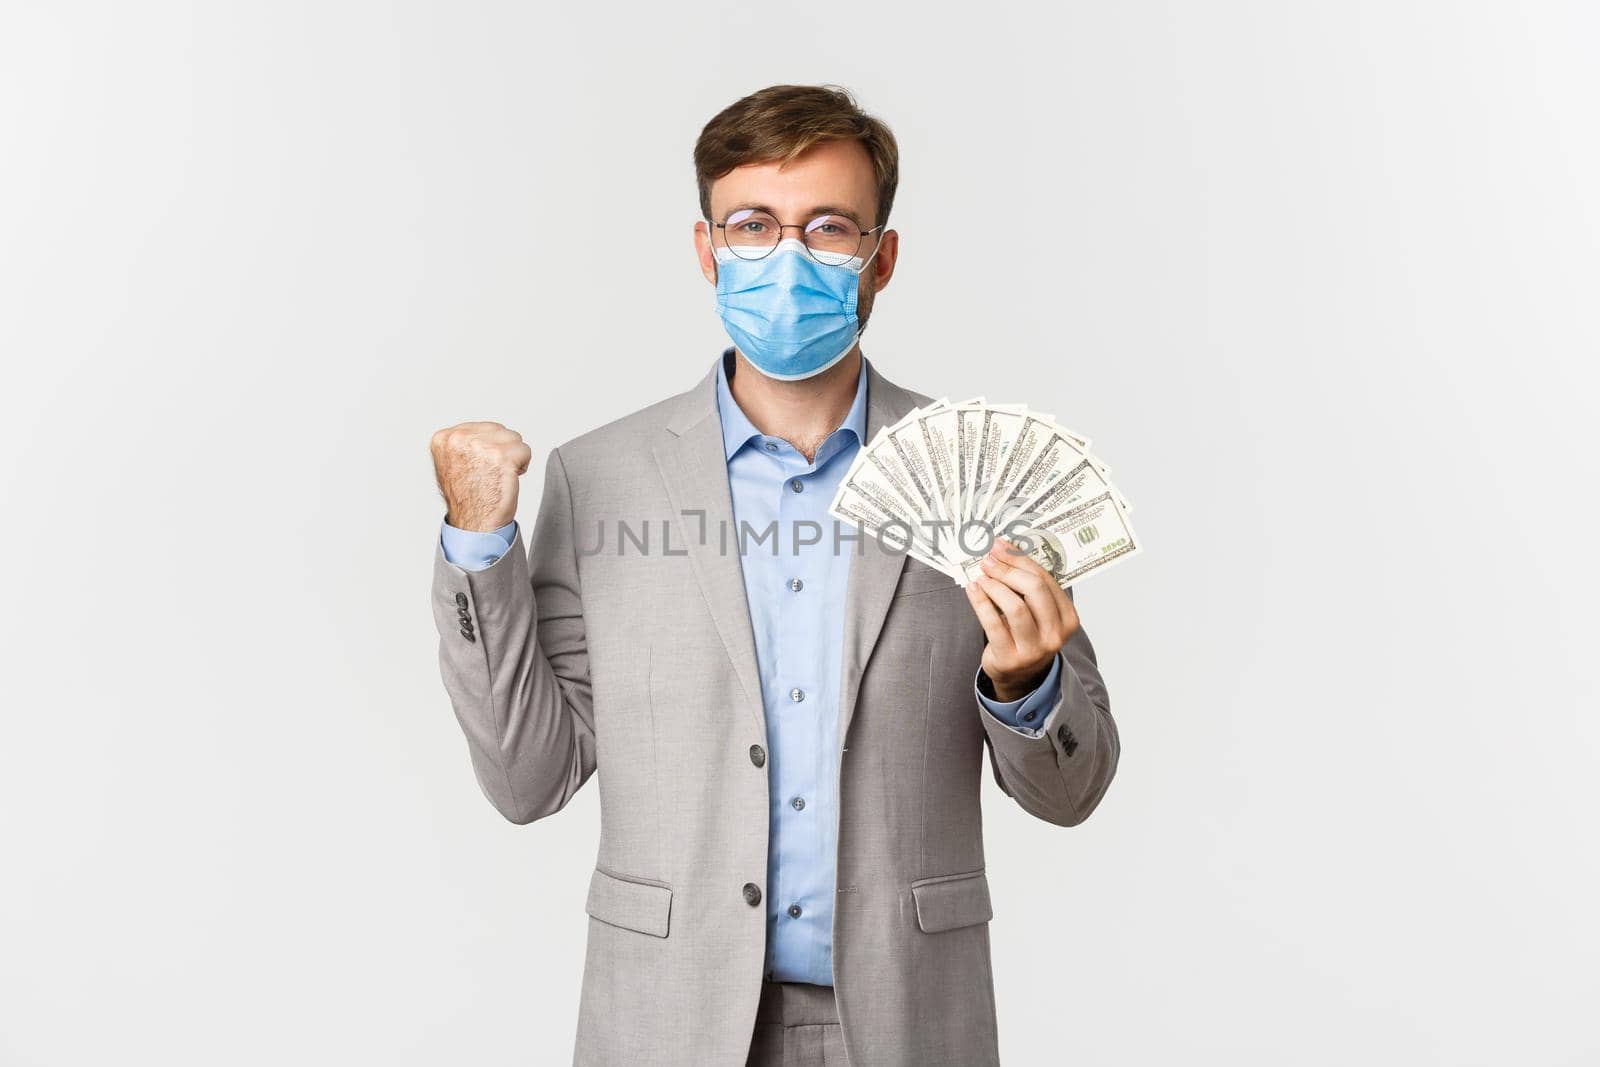 Concept of business, covid-19 and social distancing. Portrait of confident businessman in gray suit and medical mask, rejoicing and showing money, standing over white background.